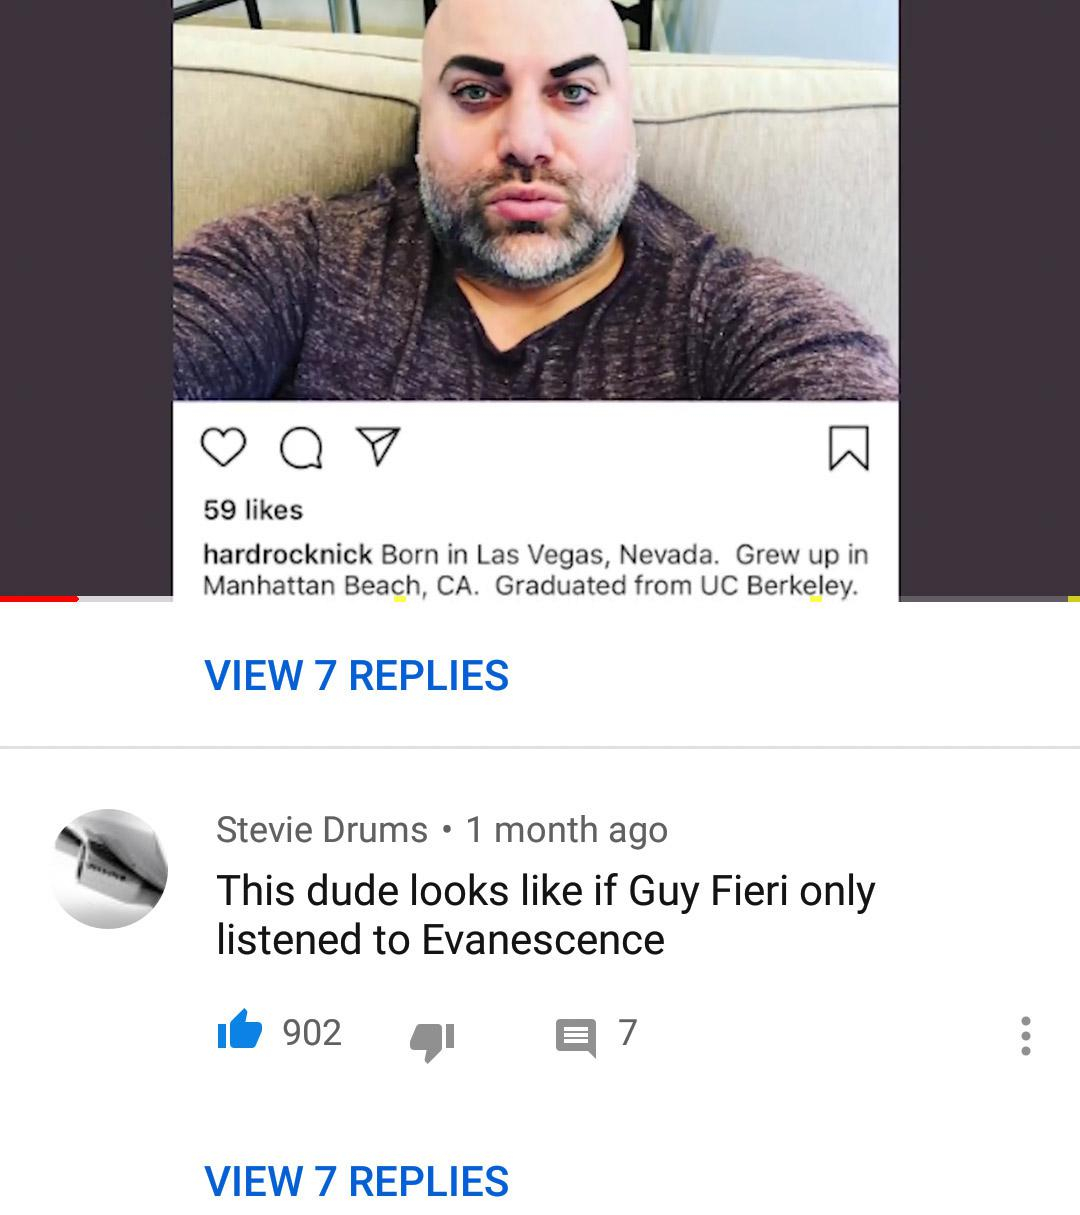 irvine cove vegas - Q 59 hardrocknick Born in Las Vegas, Nevada. Grew up in Manhattan Beach, Ca. Graduated from Uc Berkeley. View 7 Replies Stevie Drums 1 month ago This dude looks if Guy Fieri only listened to Evanescence i 902 E 7 View 7 Replies